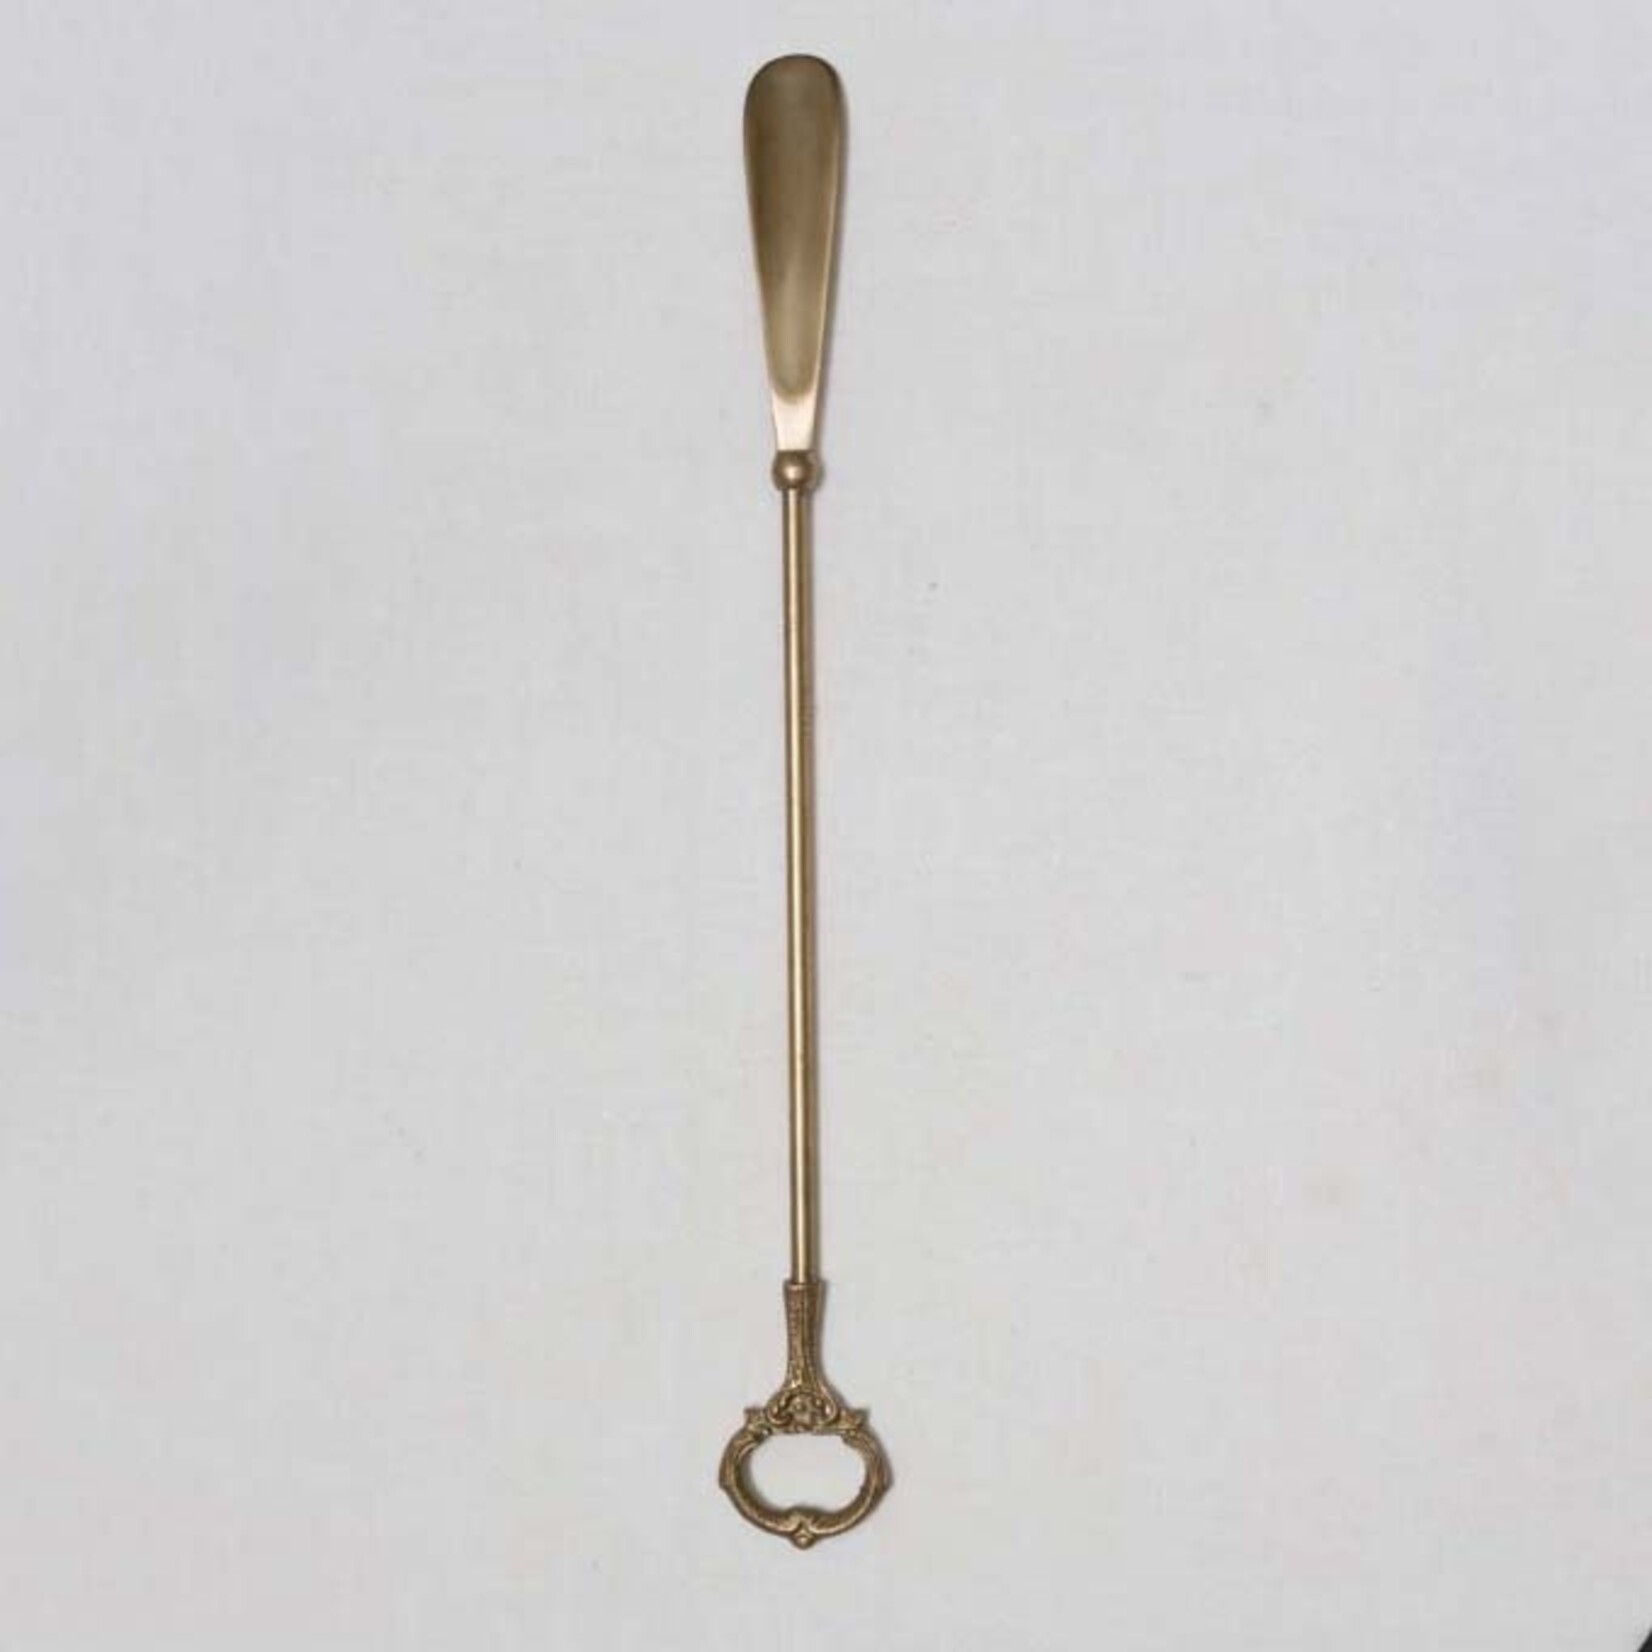 CHEHOMA SHOE HORN IN BRASS